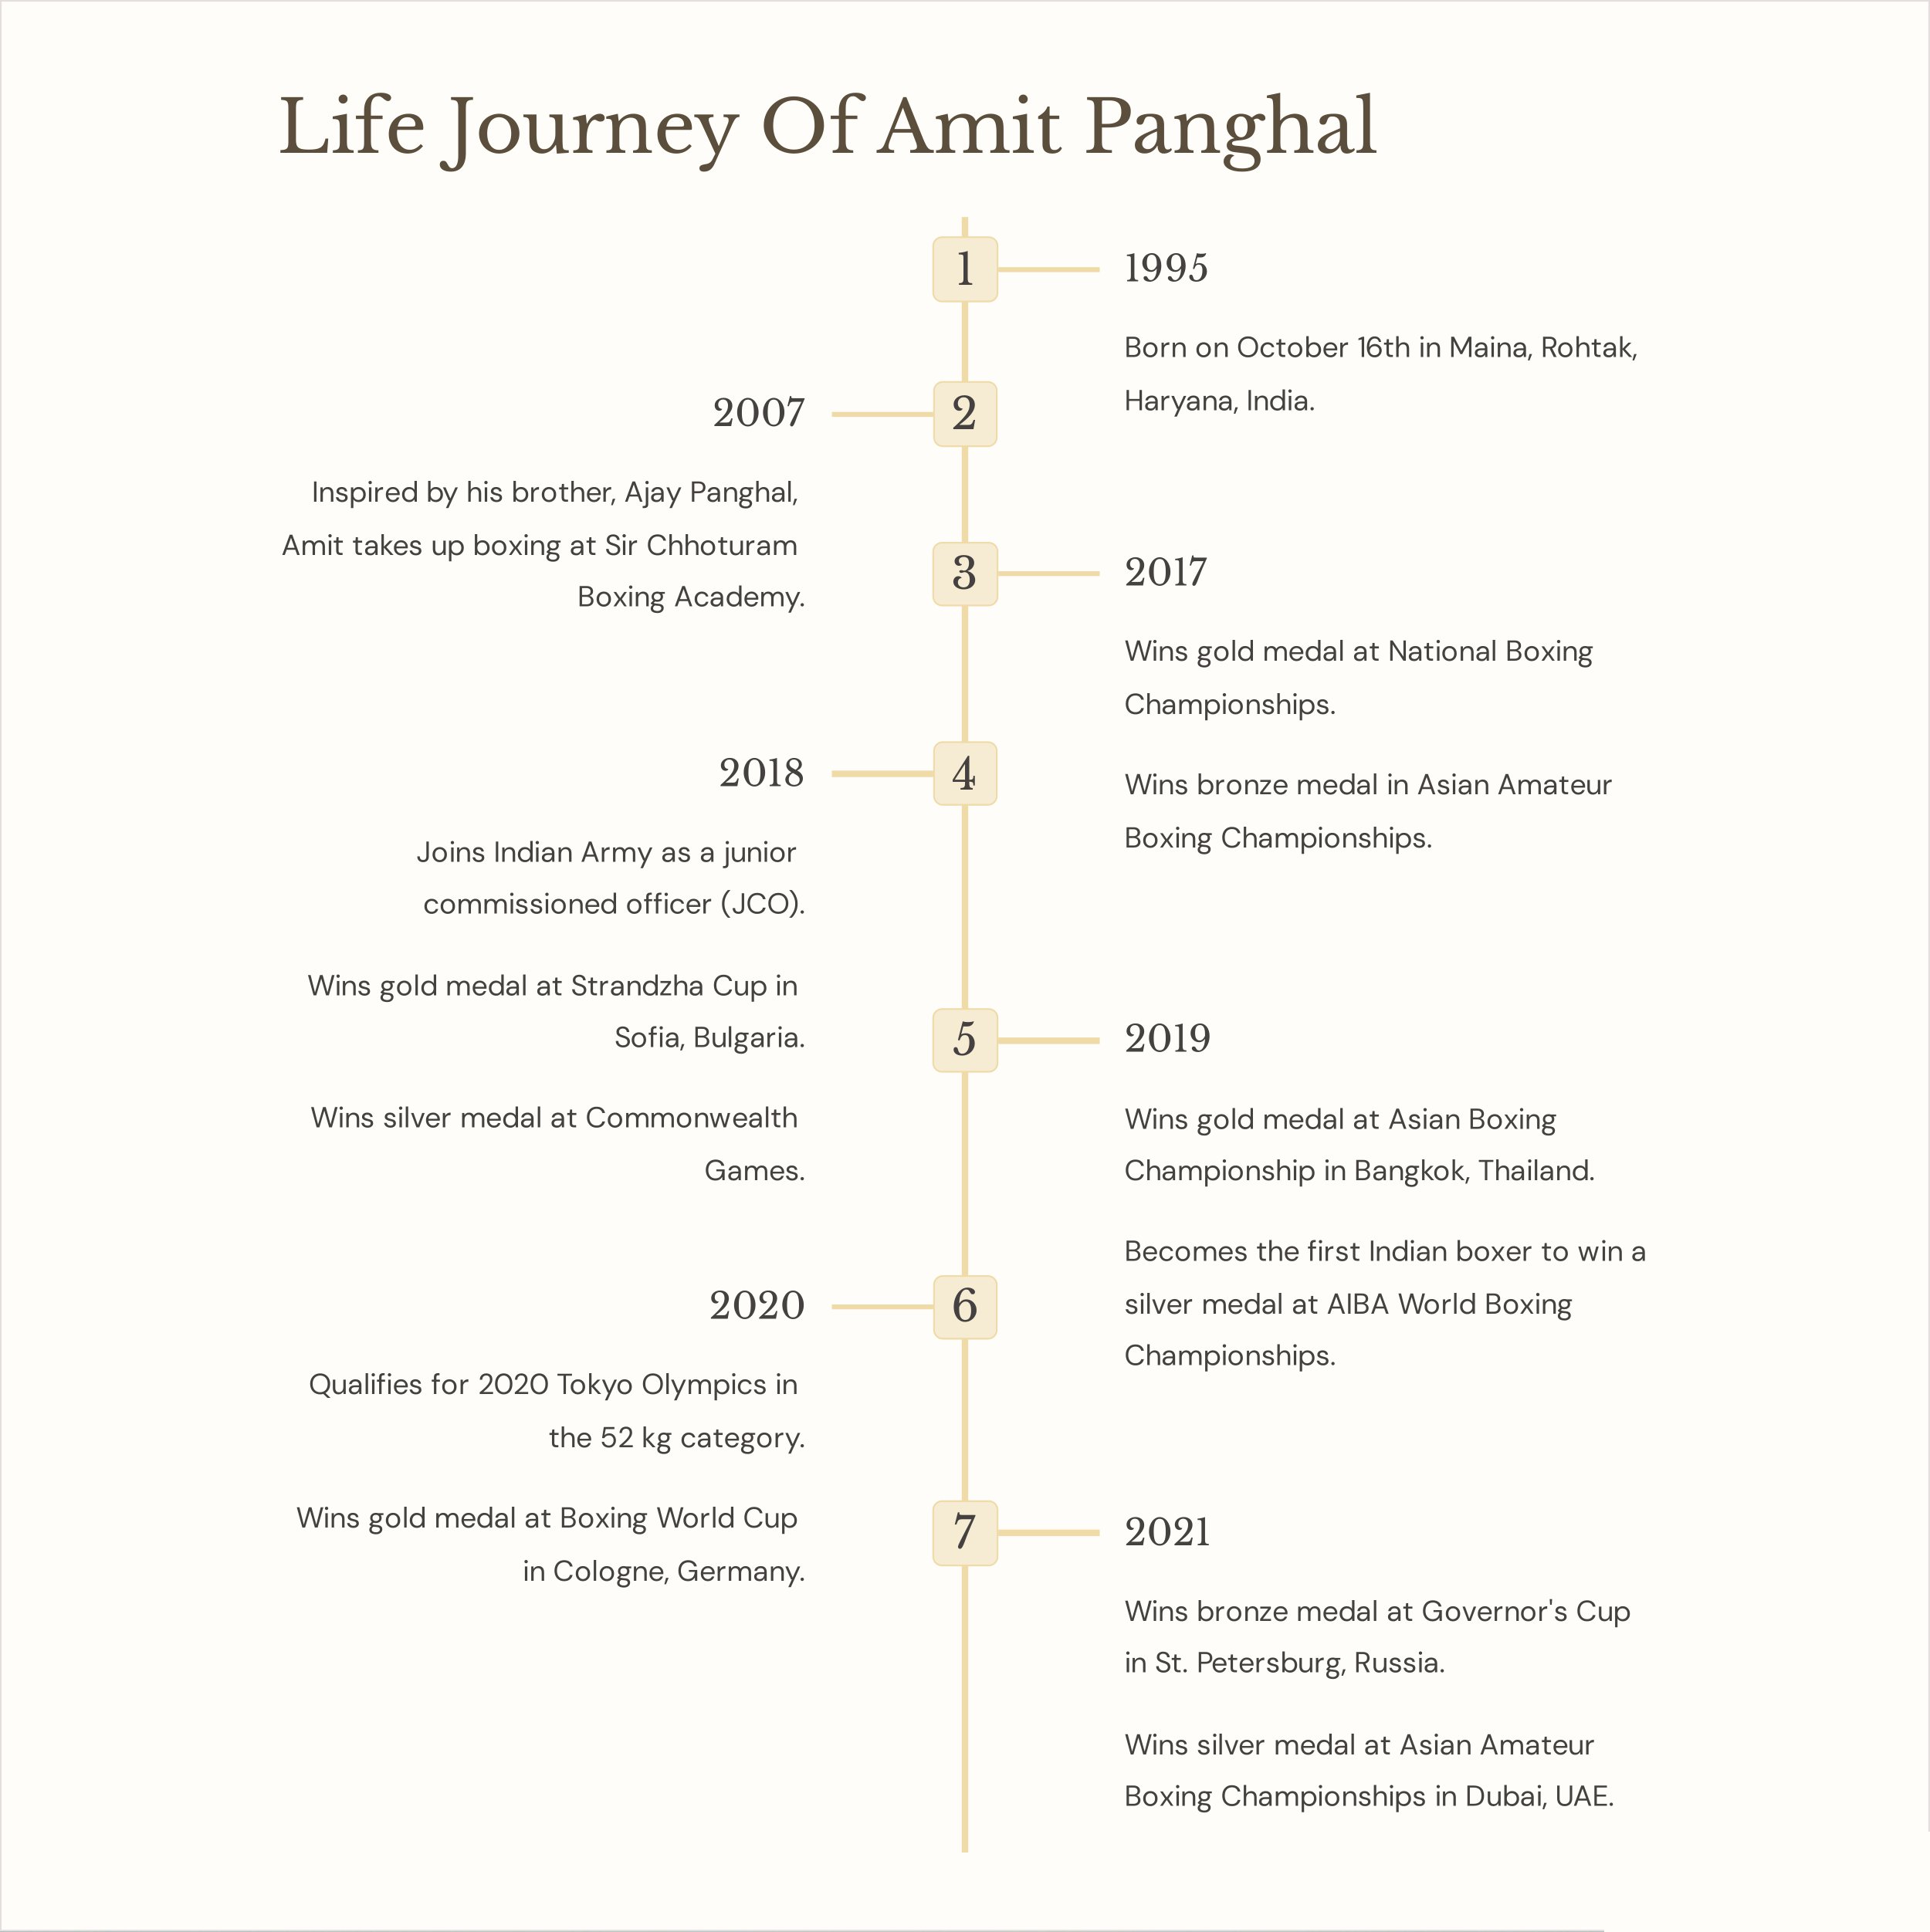 Life-Journey-of-Amit-Panghal